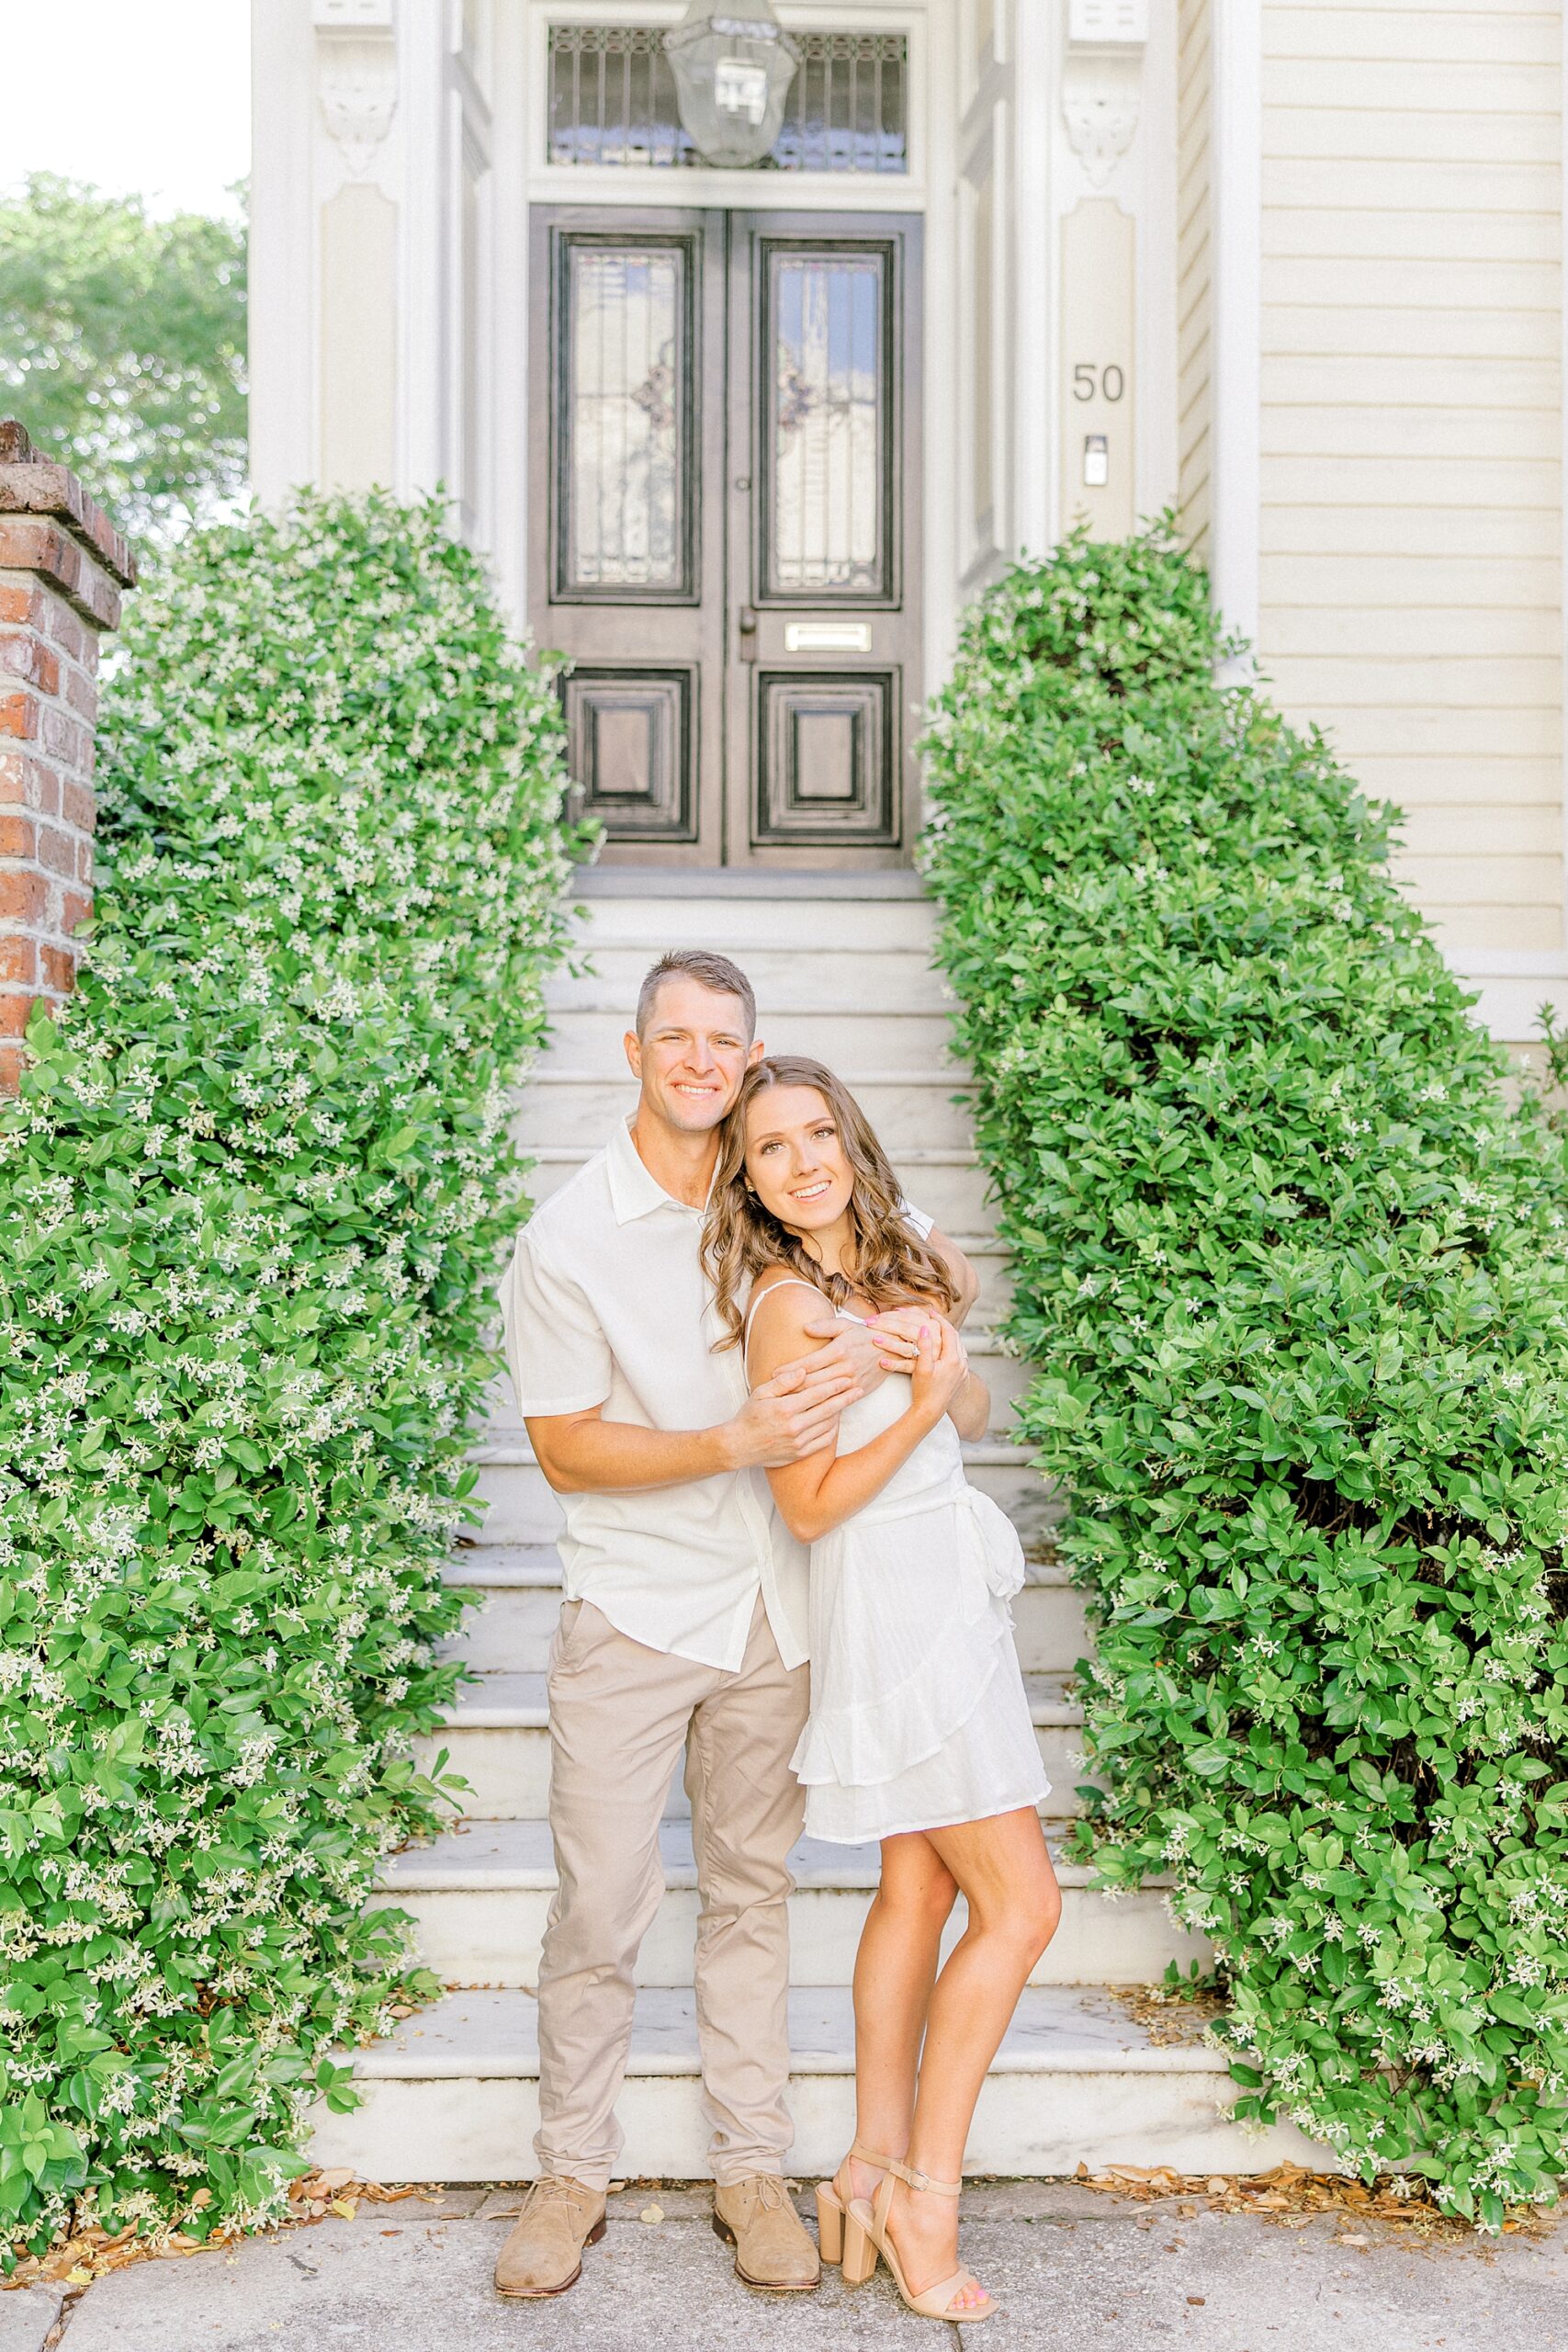 woman in white dress leans against man's chest in front of ivy covered walls